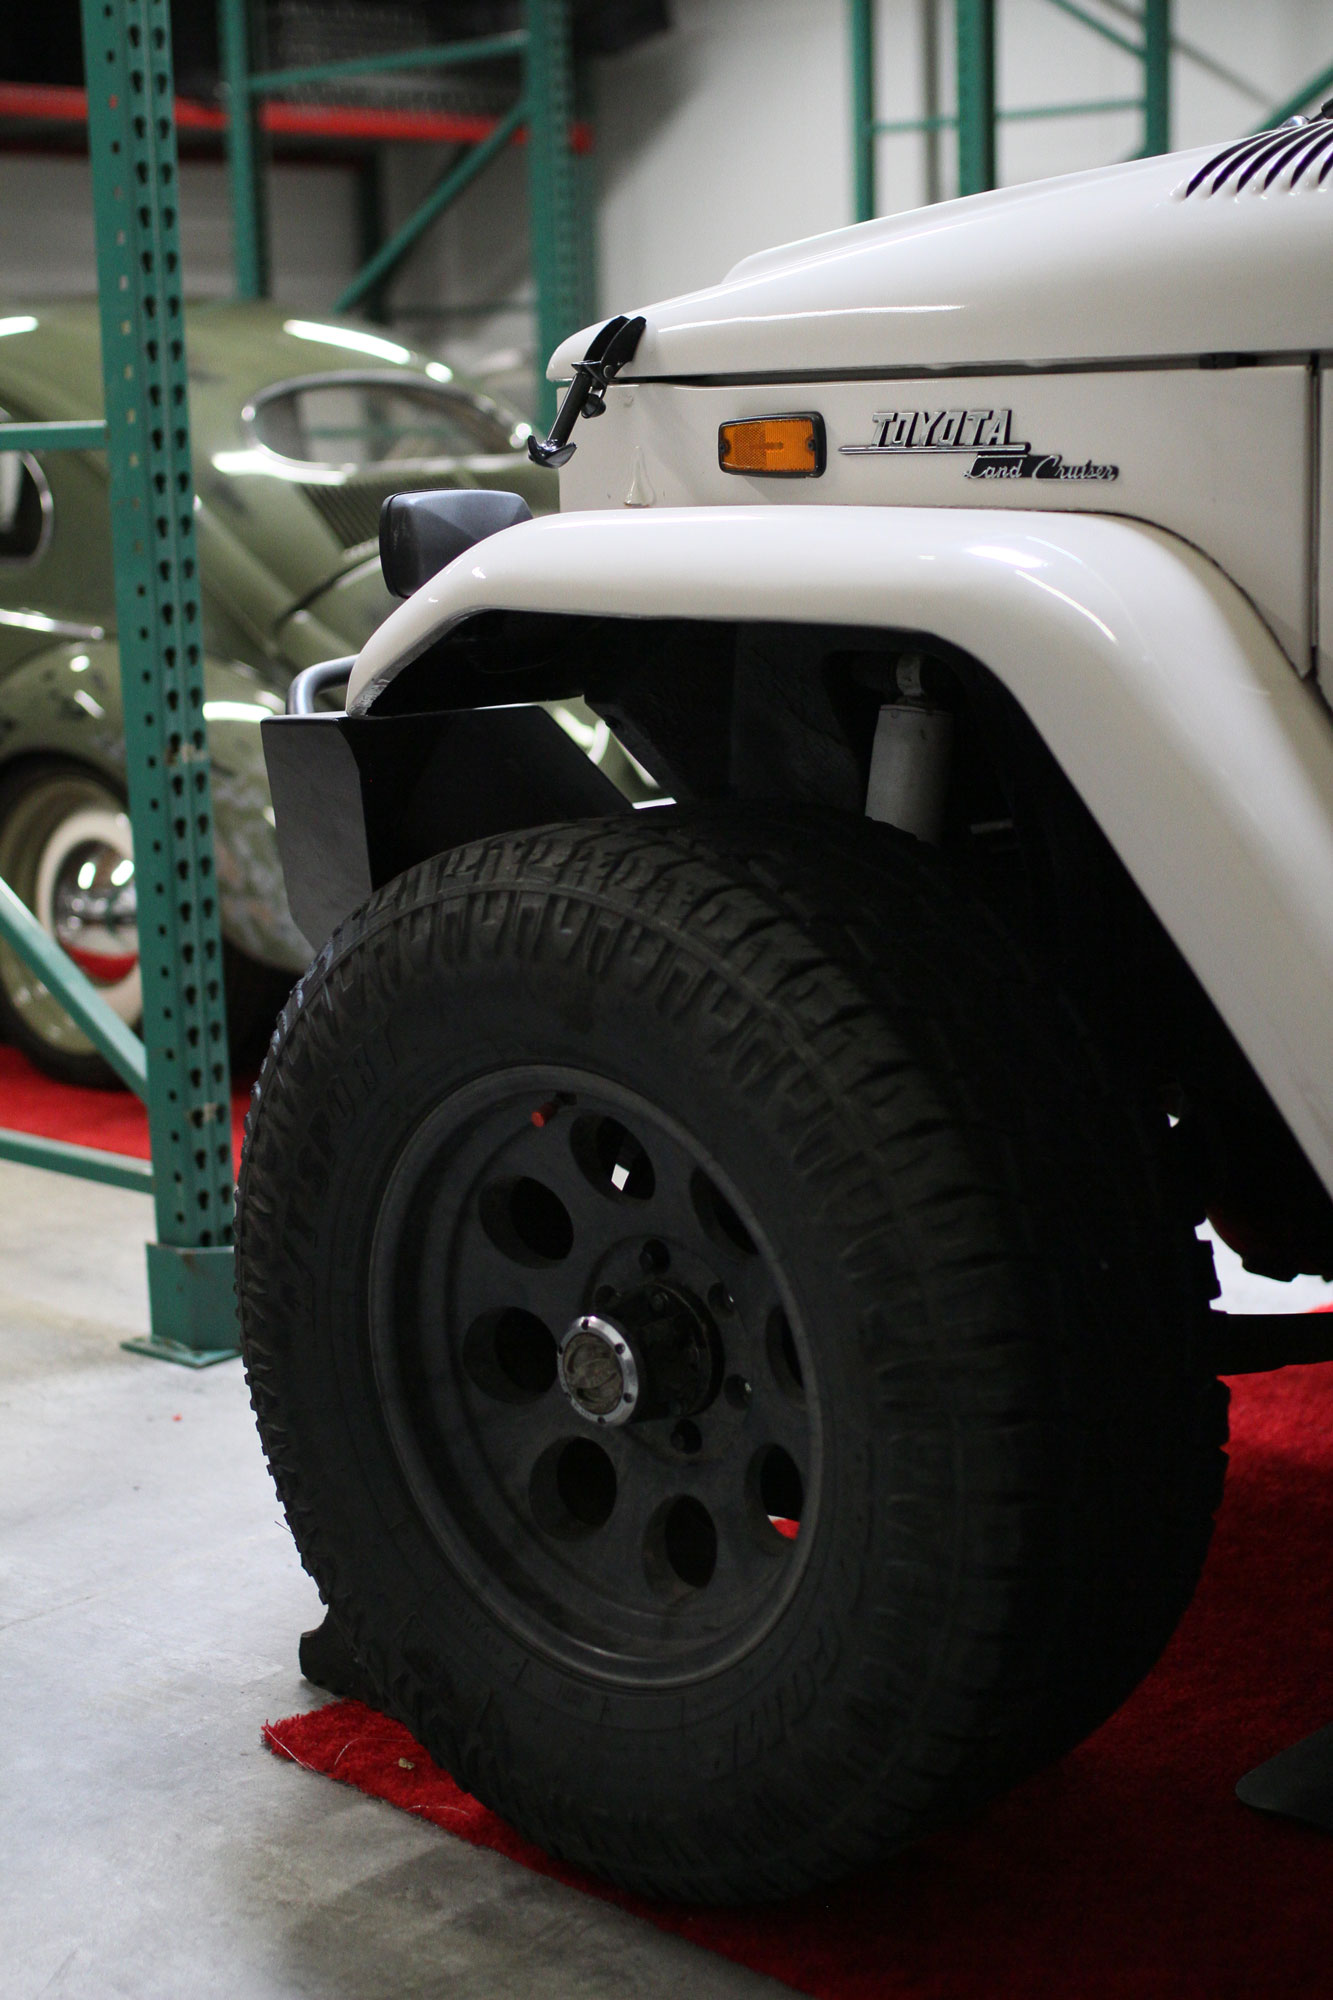 VW Beetle standing in the garage with a white Toyota FJ40